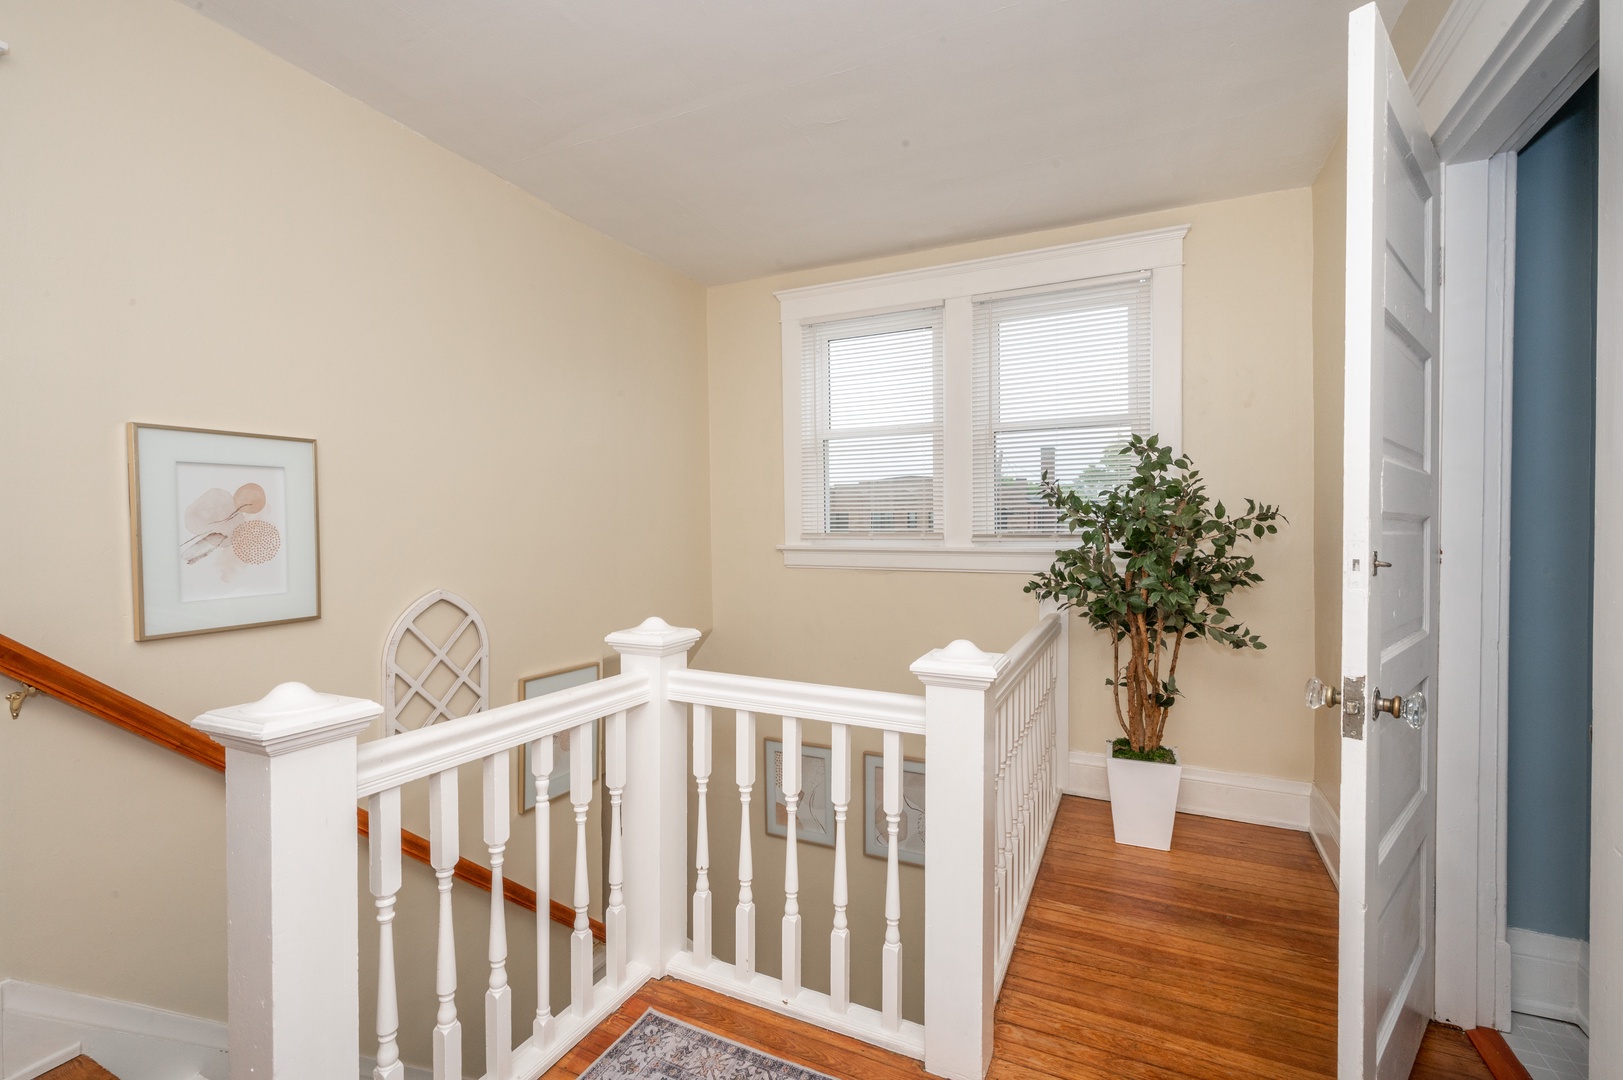 The spacious 2nd floor landing provides access to this home’s 3 bedrooms